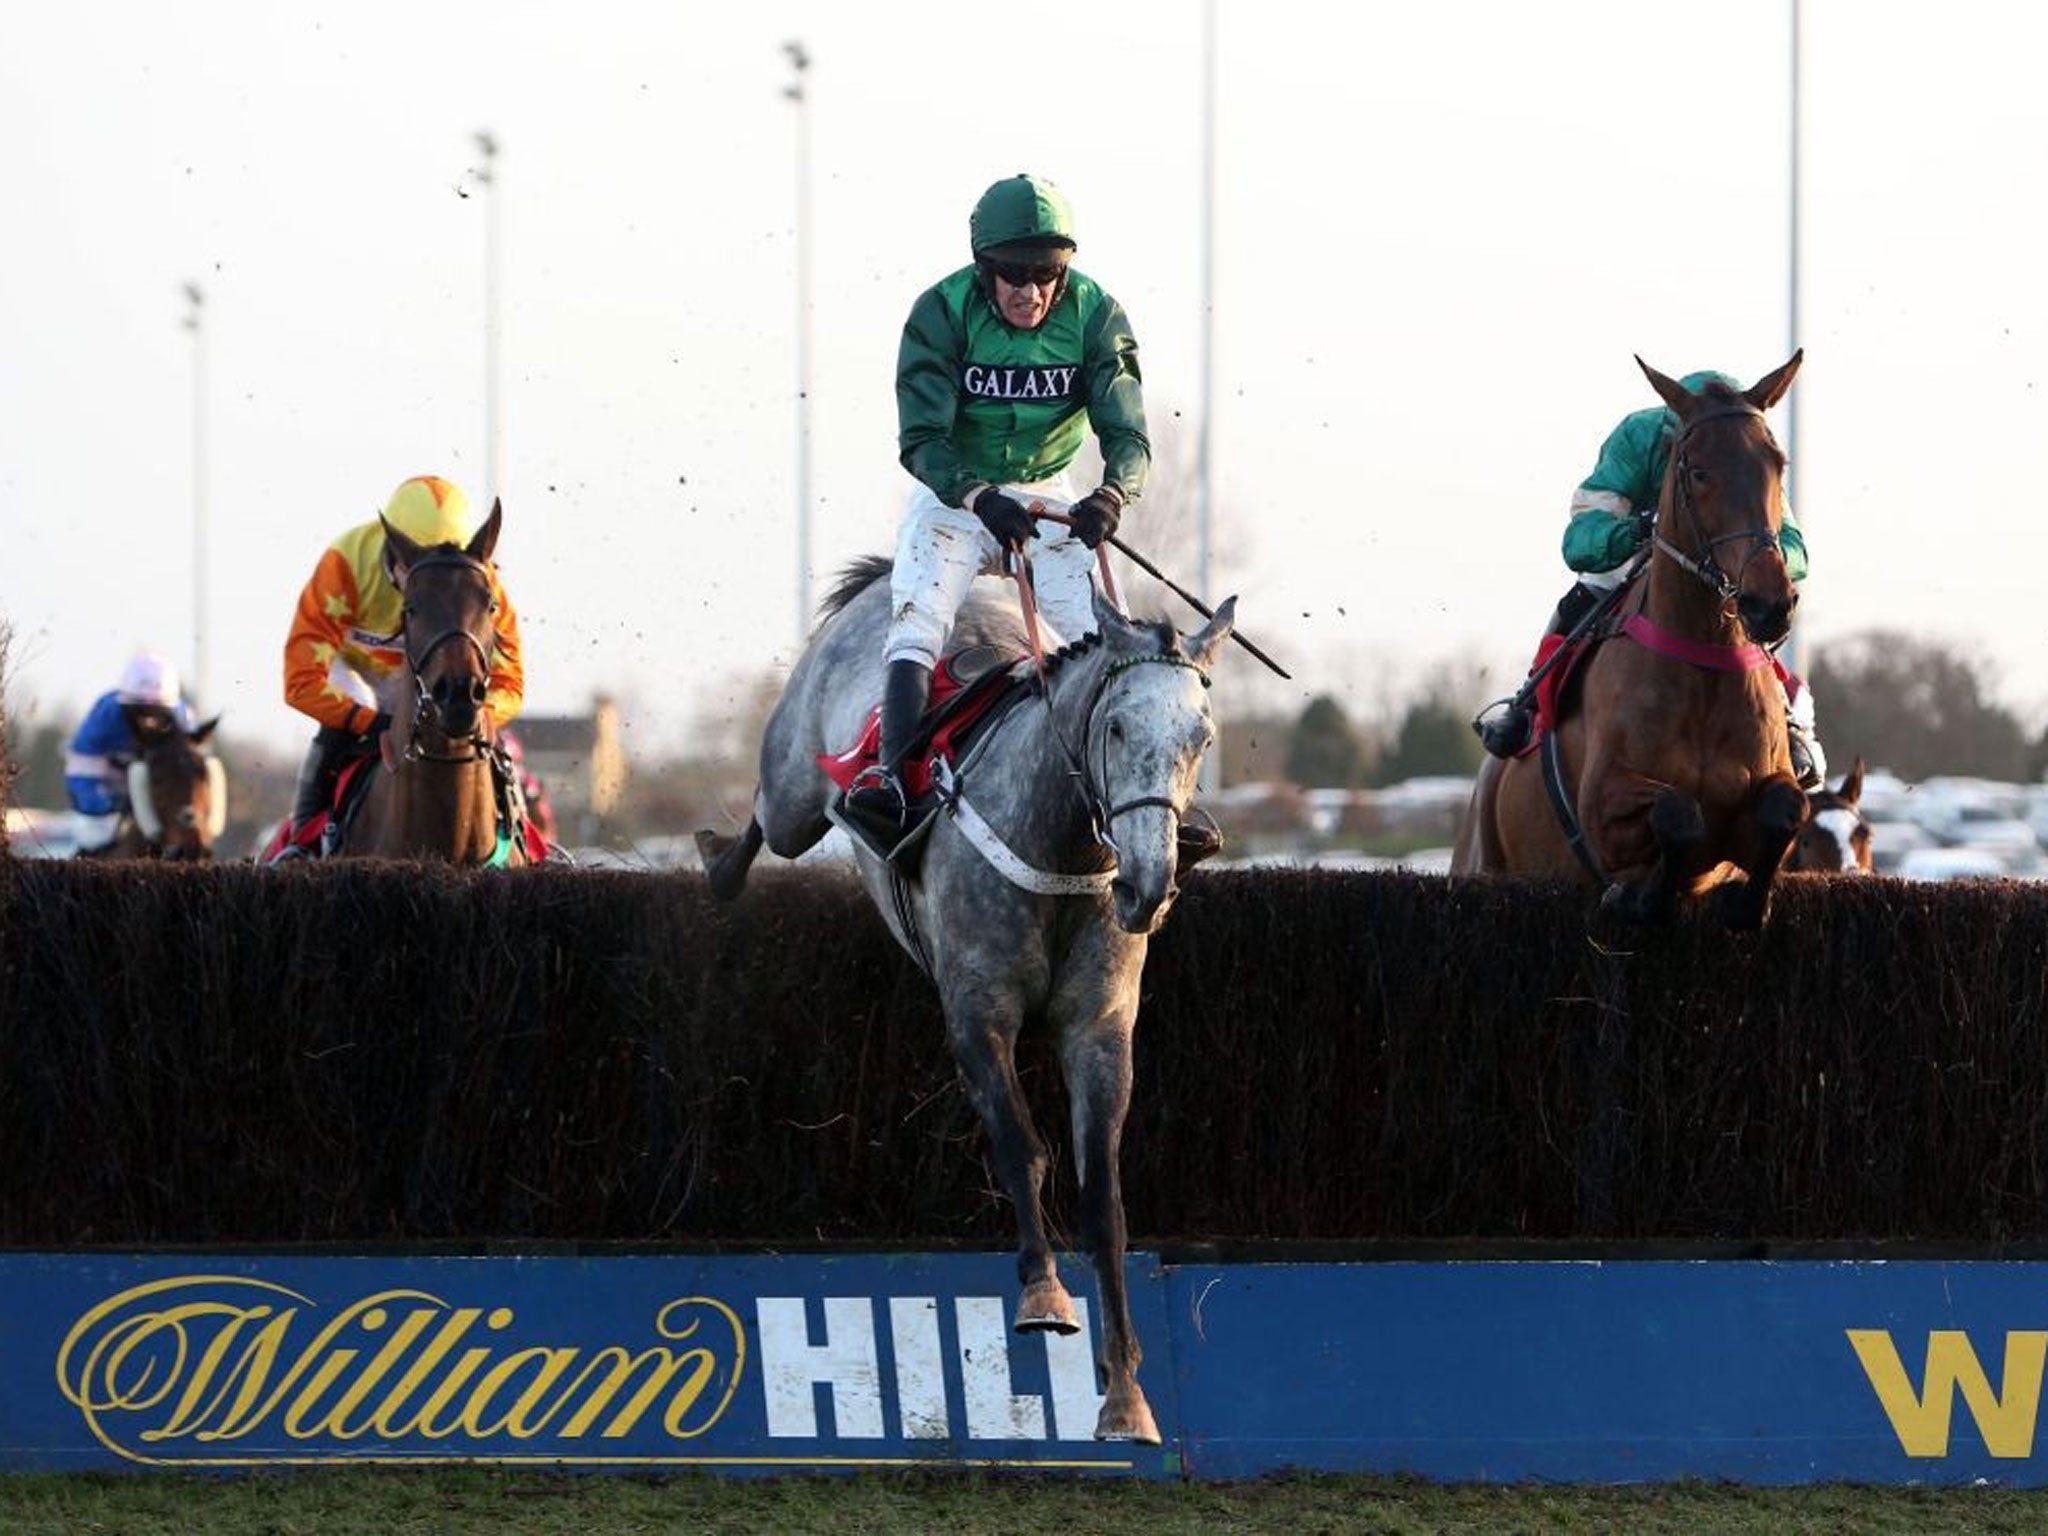 One to watch: William Hill’s share price is expected to recover in 2014